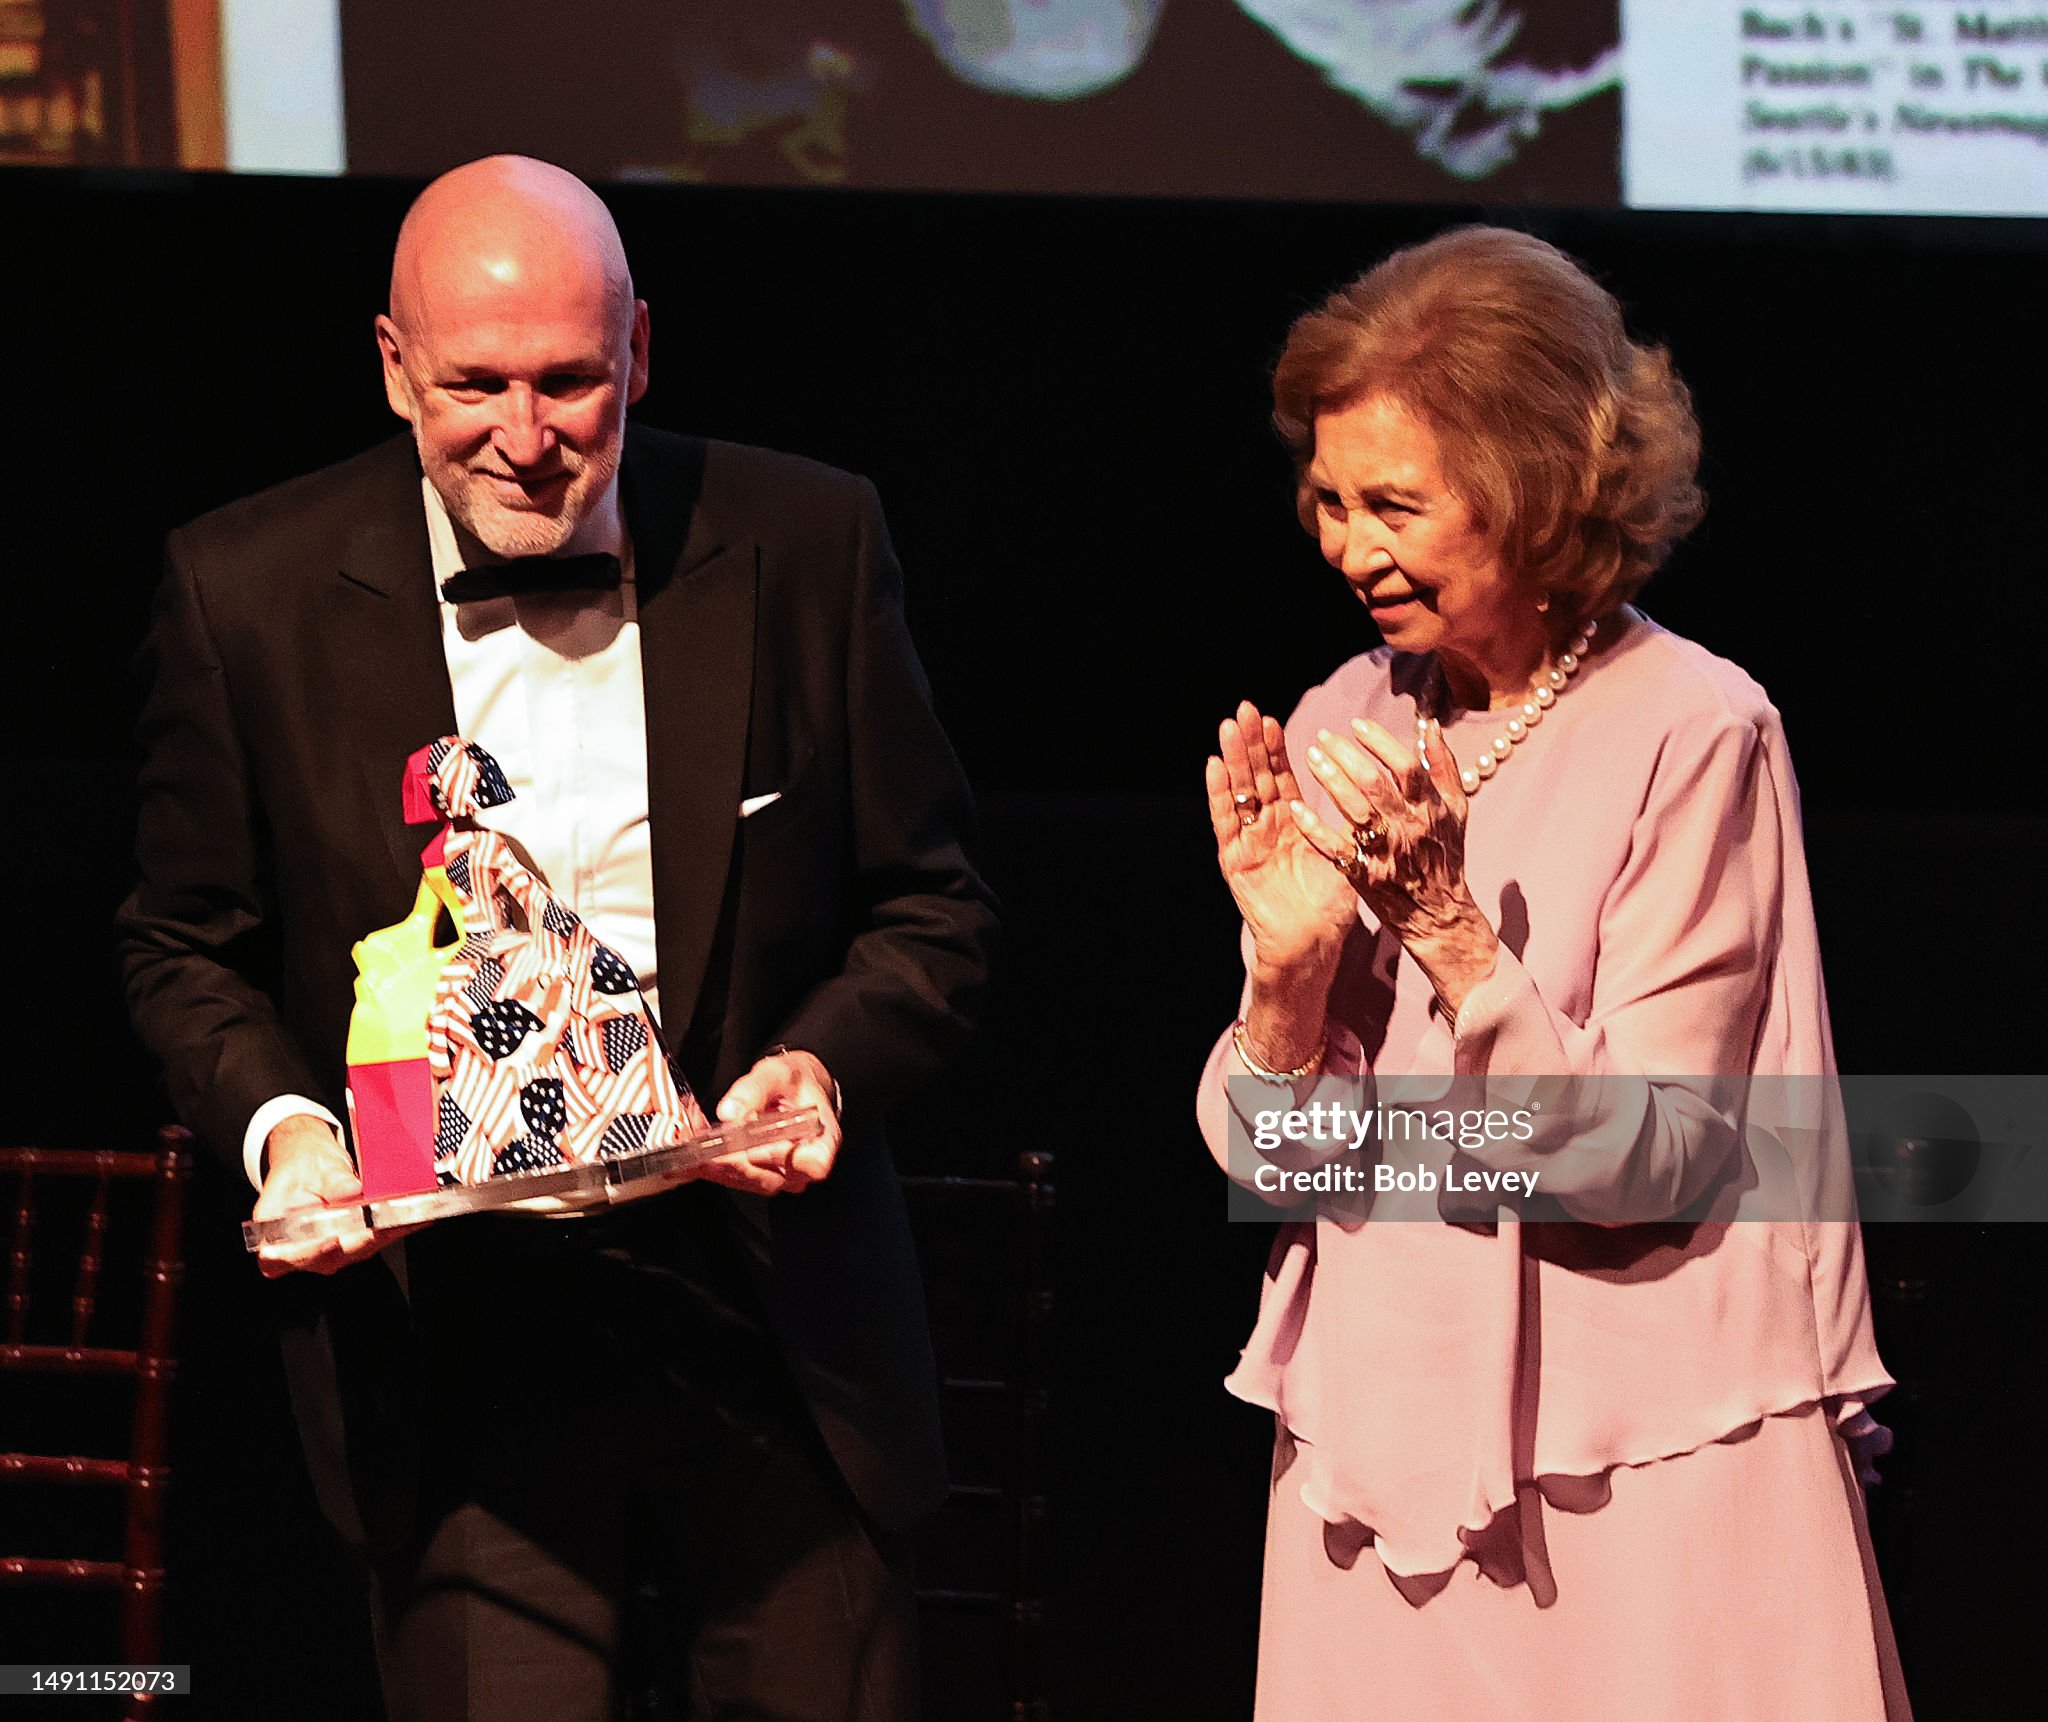 ignacio-torras-receives-a-sophia-award-for-excellence-from-queen-sofia-of-spain-during-the.jpg